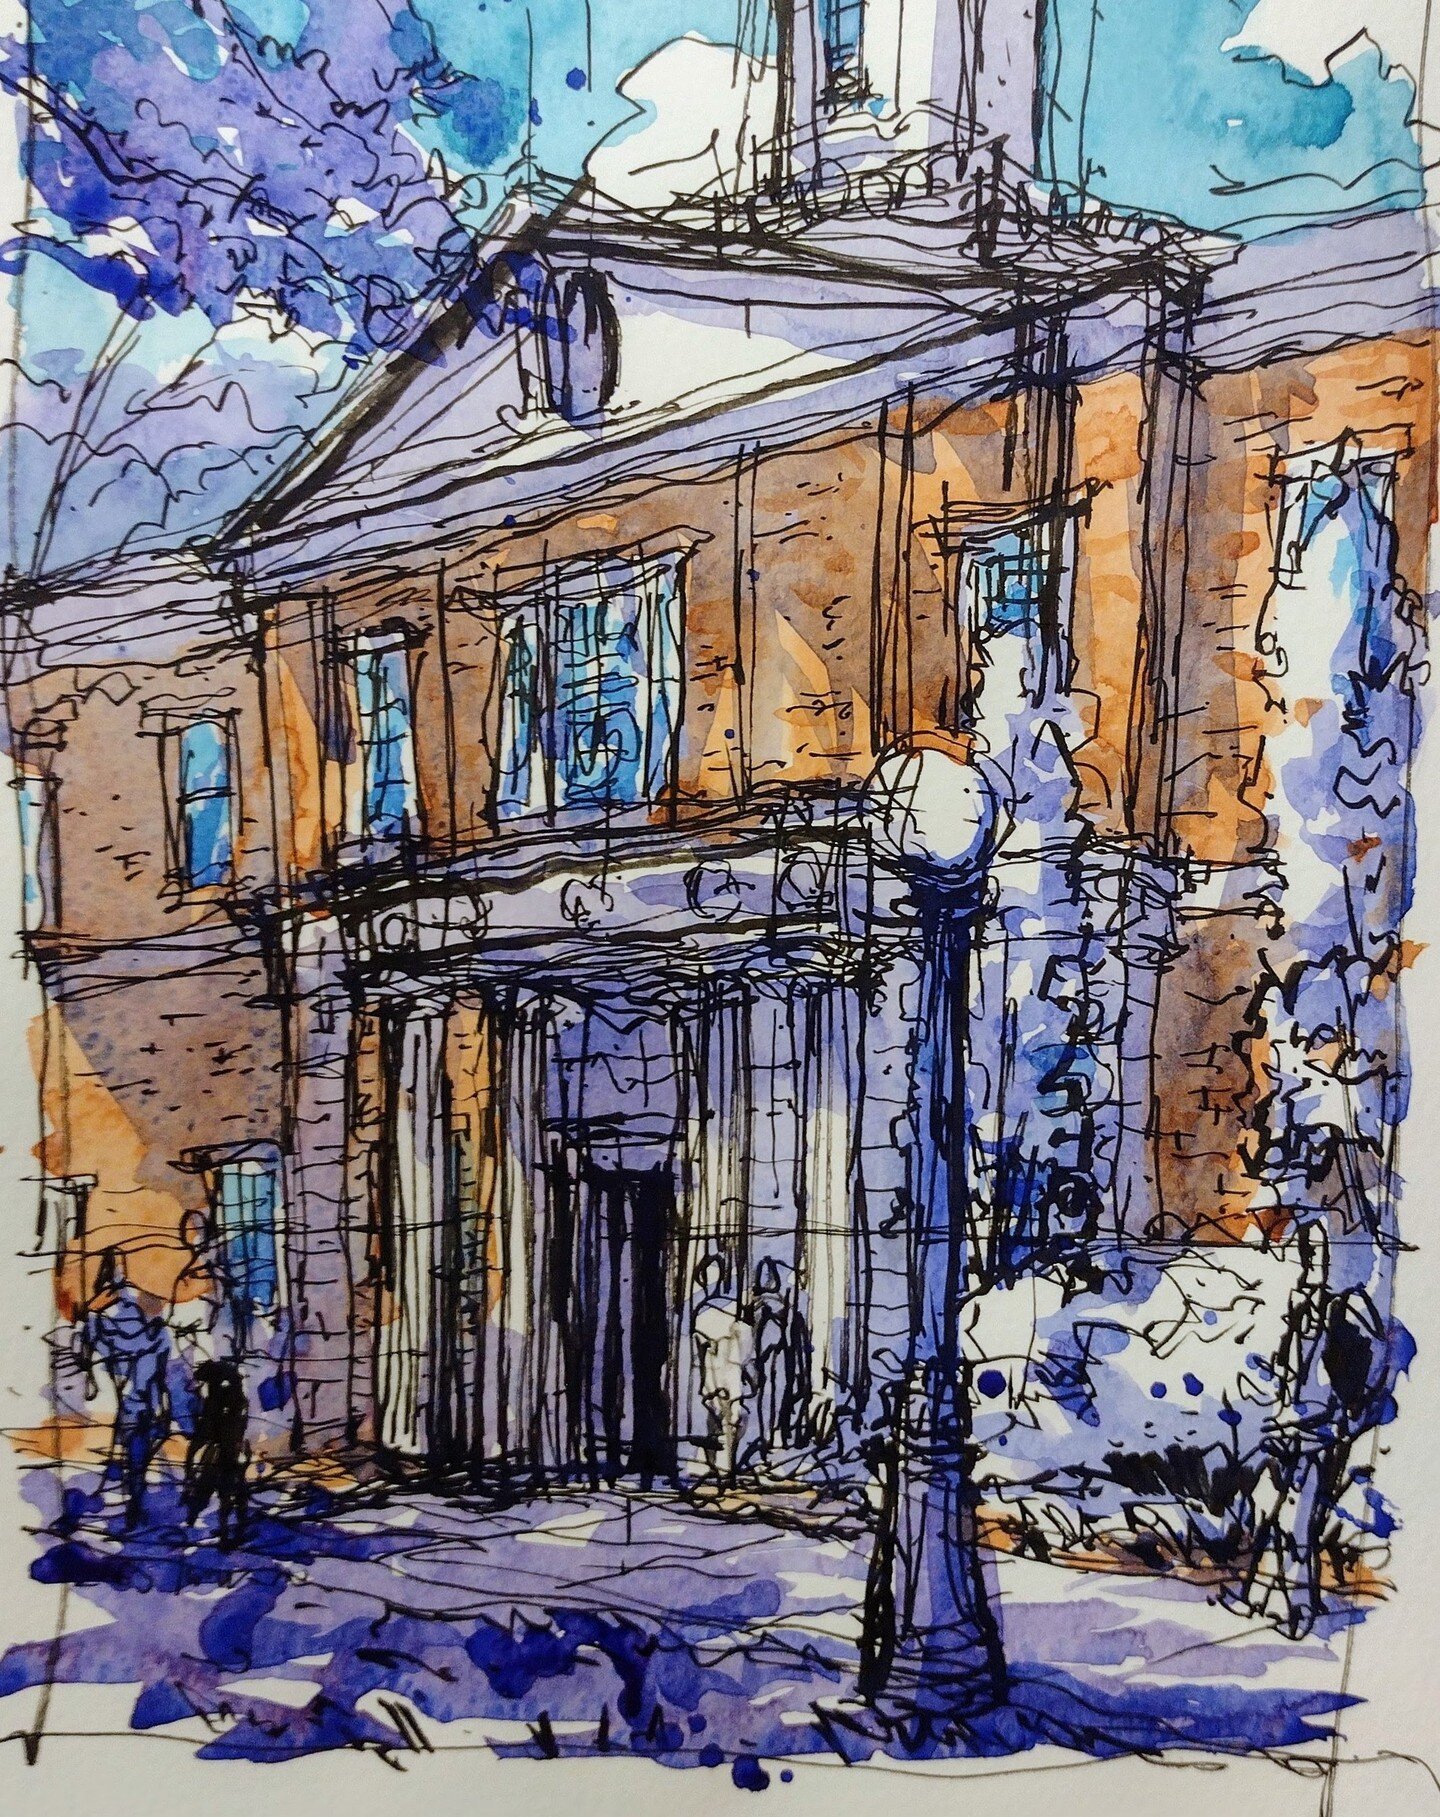 FUN time sketching for our FIRST #AthSketch_GA of the fall!

Taking time with folks to sketch OUTSIDE is great. Not sure why we are always drawn to the @ugalawschool up we seem to sketch it often! 

We are all still working on our serious &quot;desig